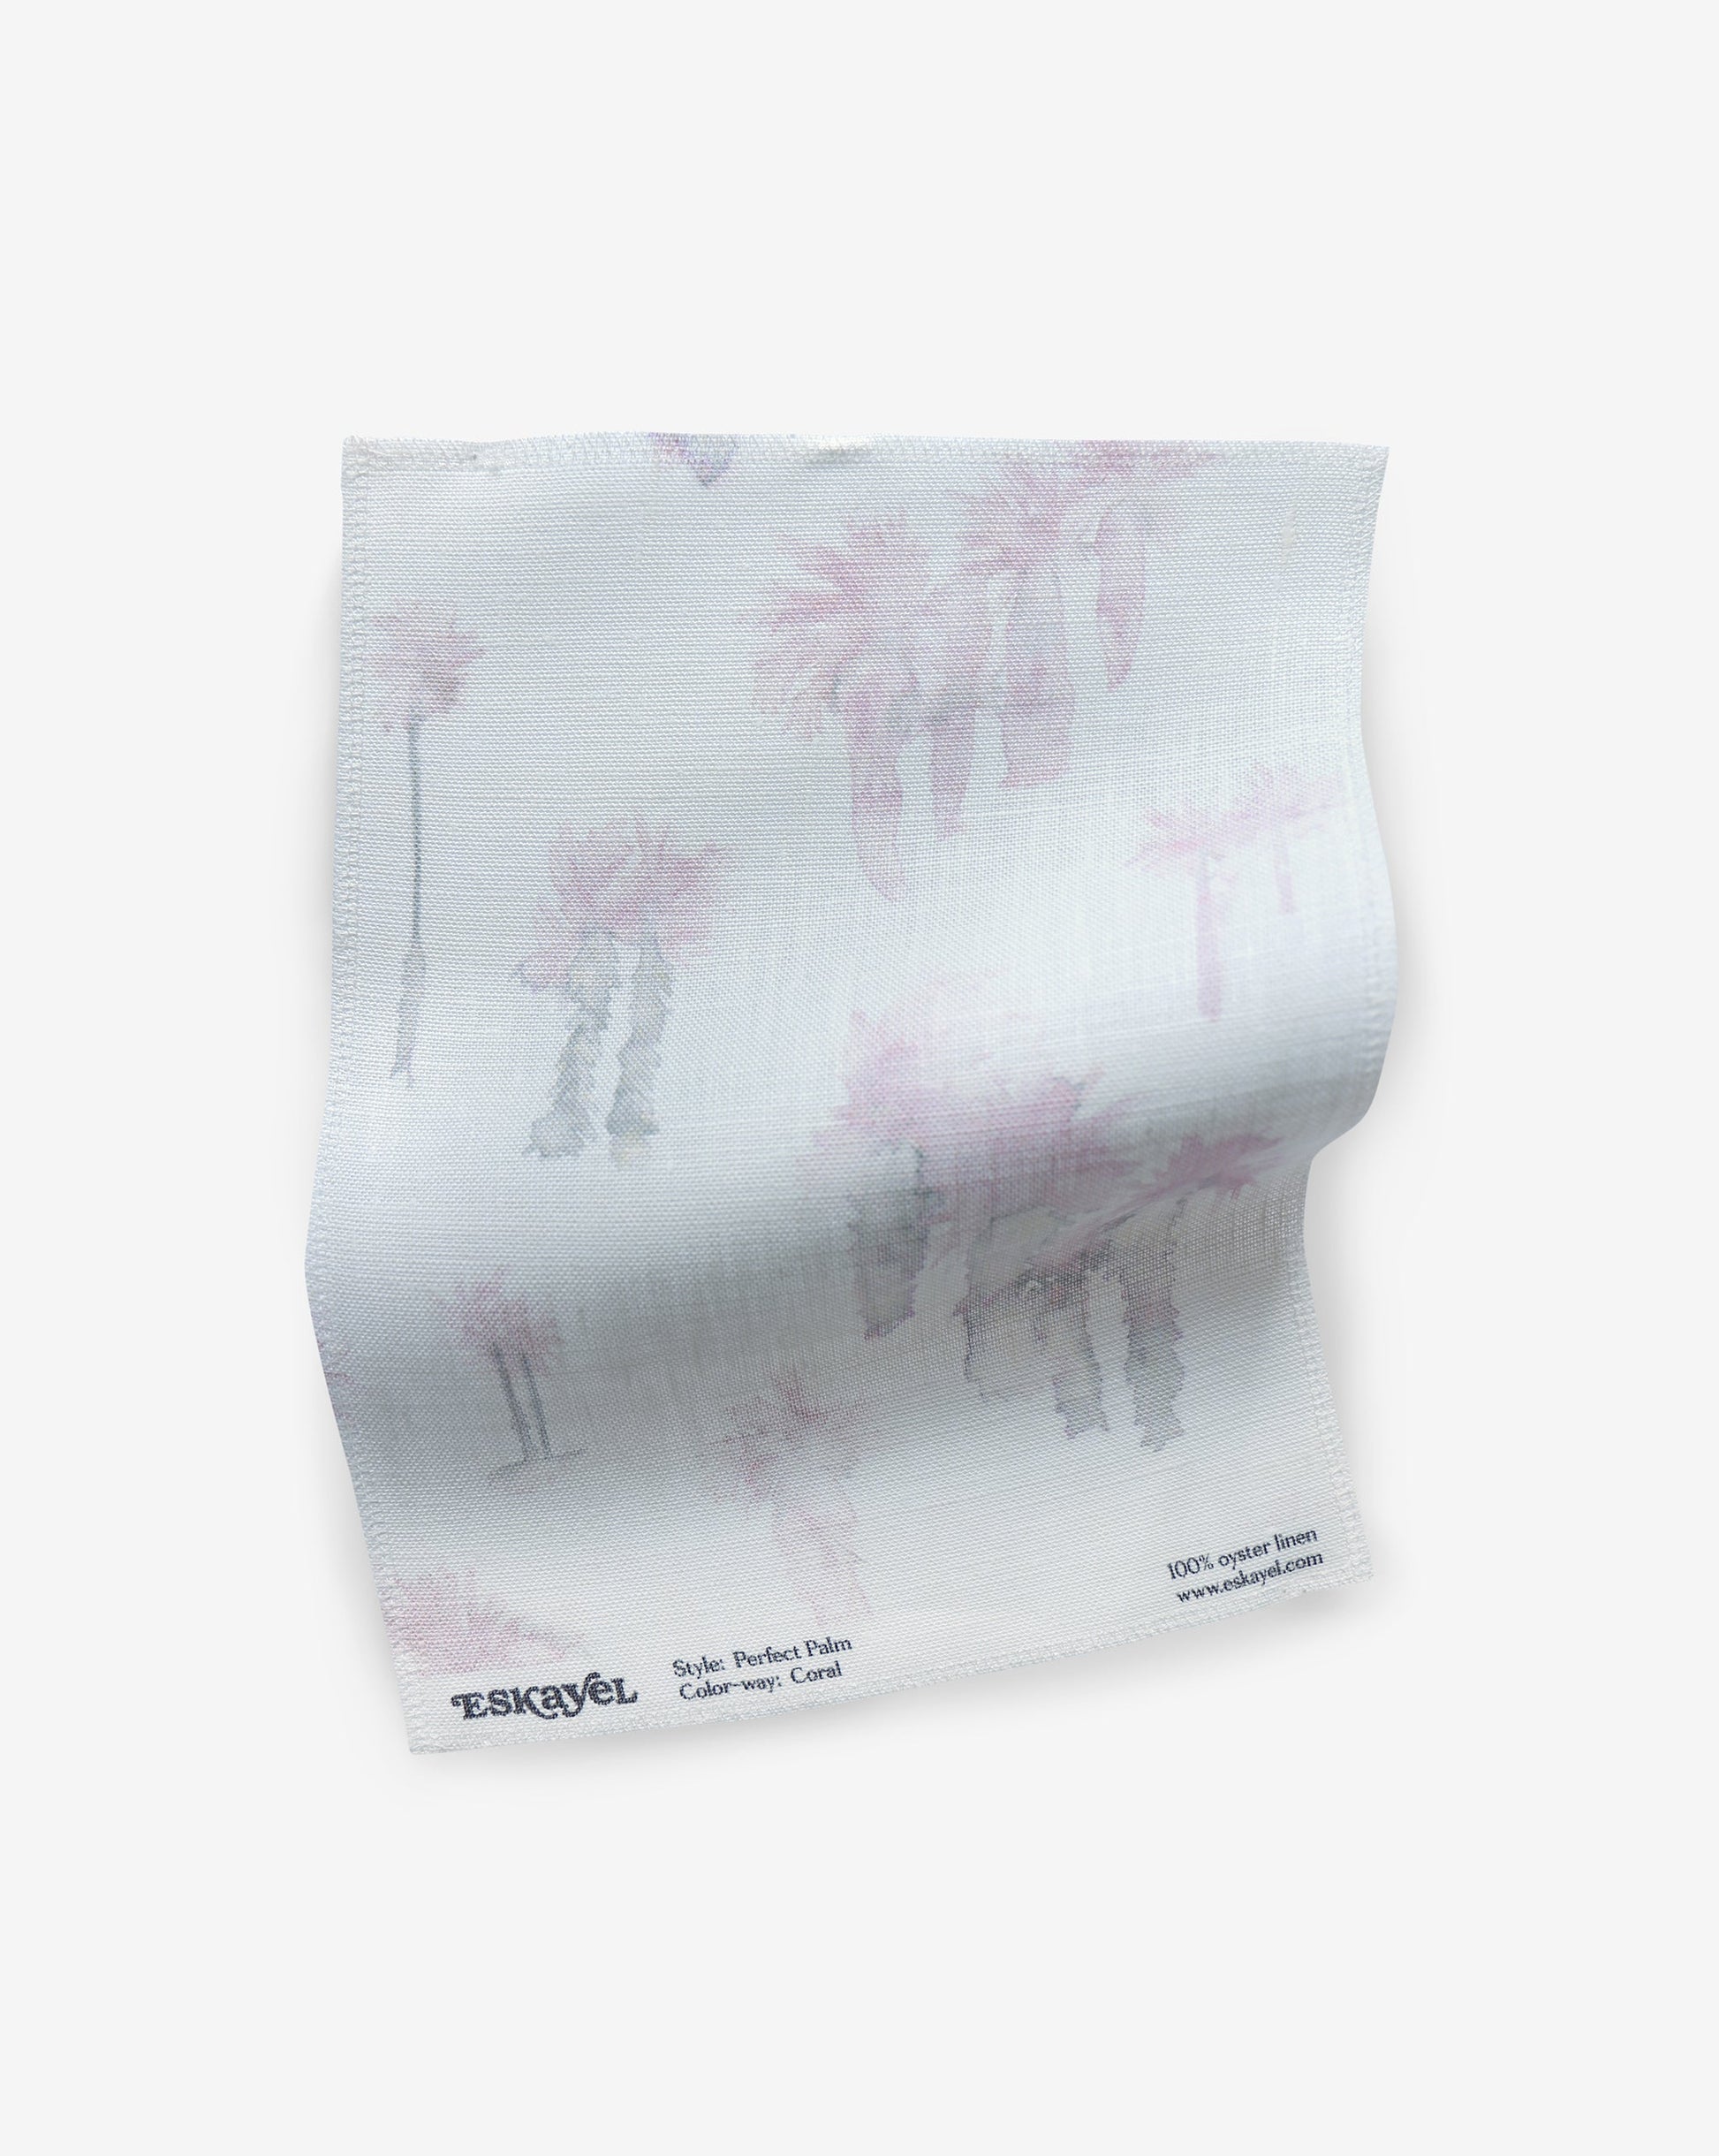 A white fabric with pink palm trees, Perfect Palm Fabric Coral, perfect for surfing